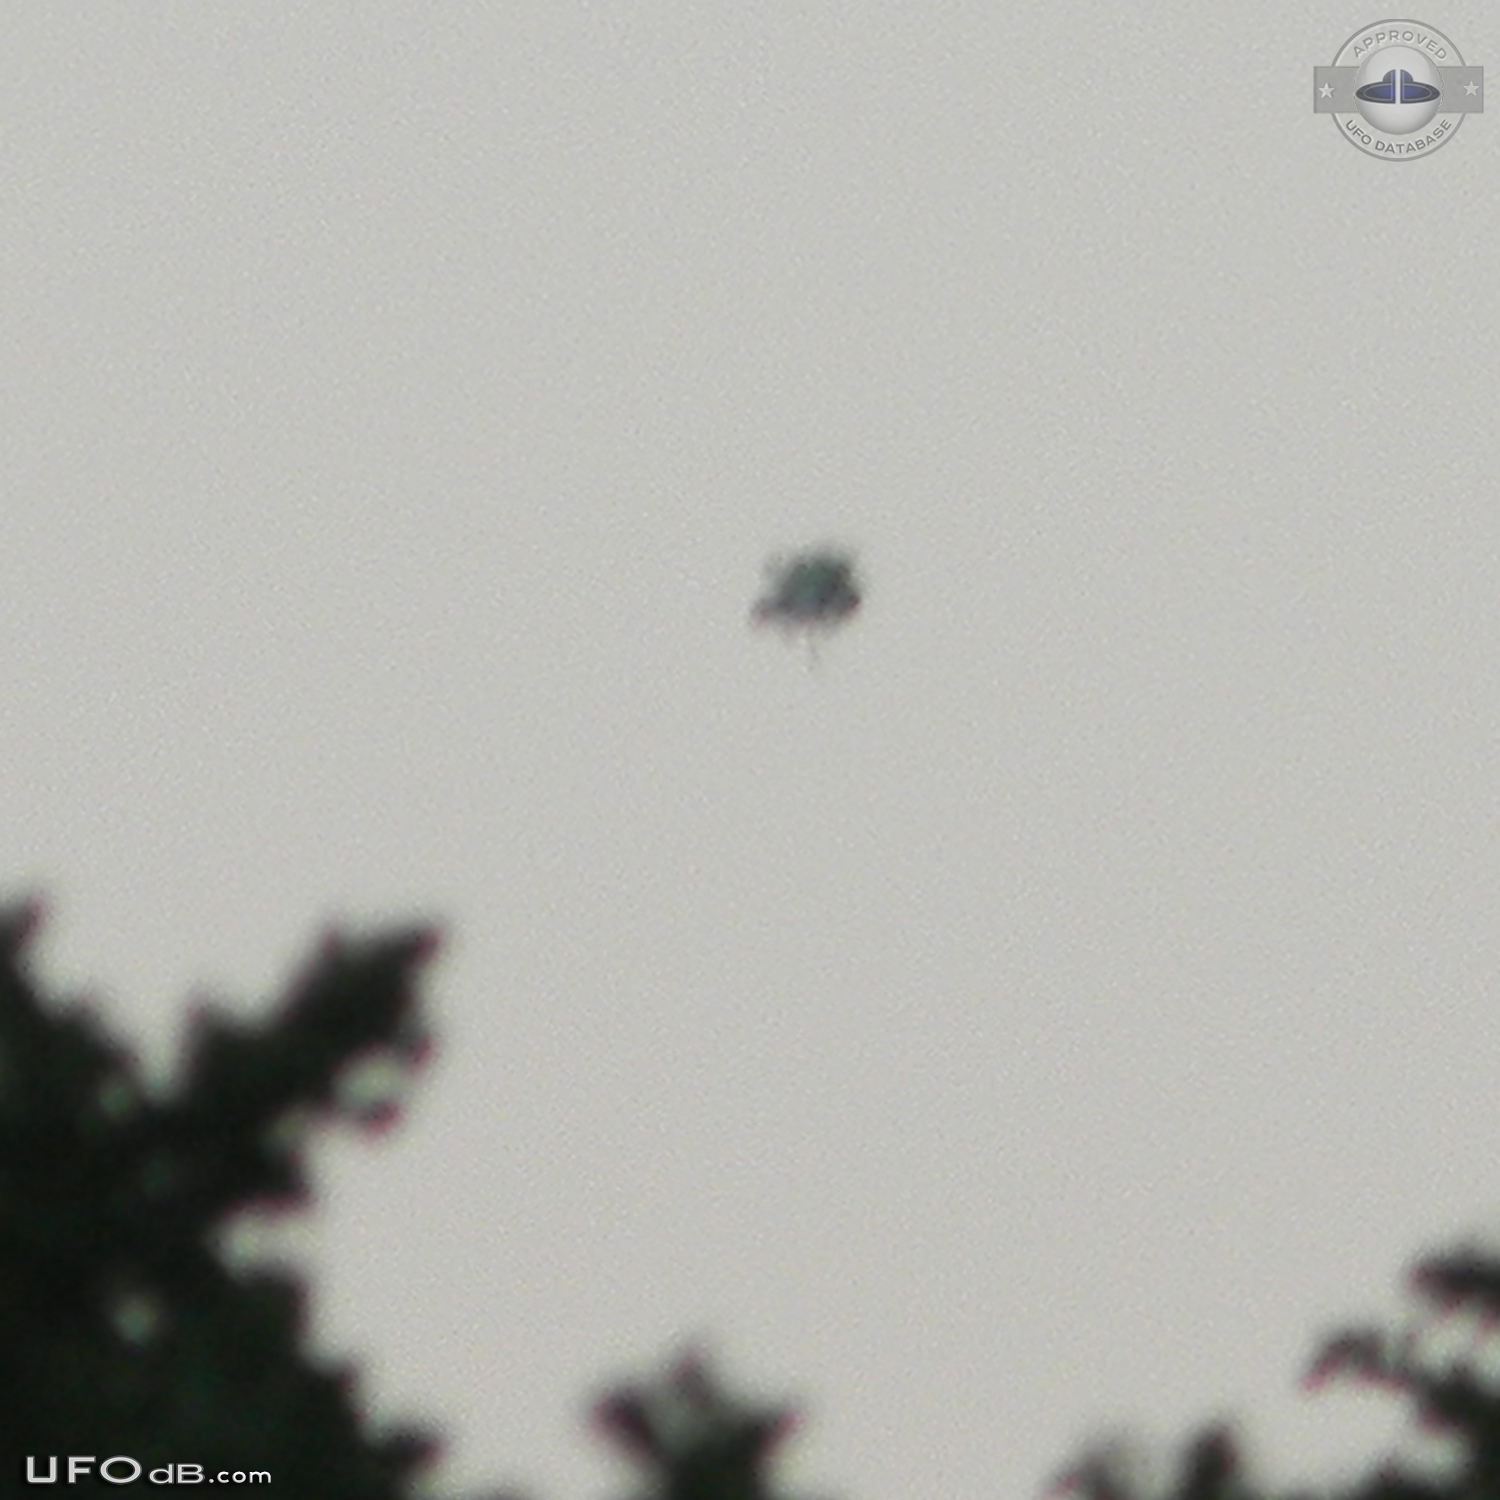 UFO hovered over Lake Lewisville in Texas and extended appendage 2014 UFO Picture #570-4